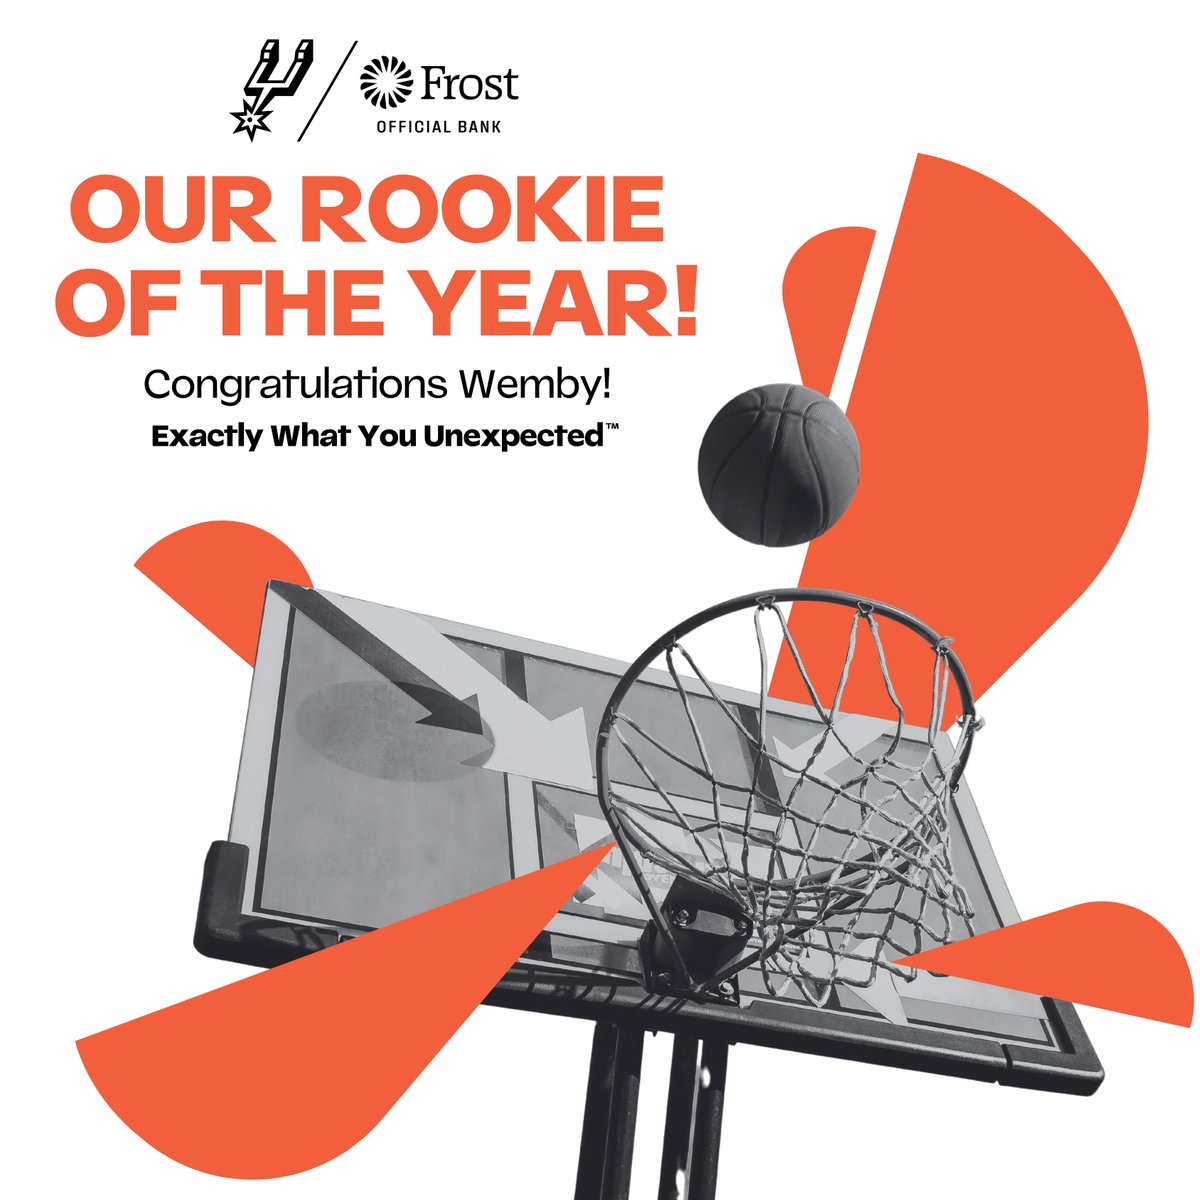 Here at Frost, we are #ExactlyWhatYouUnexpected, but there is nothing unexpected about our Rookie of the Year! Congratulations @wemby, from one San Antonian to another 🩶🖤 #FrostBank #ExactlyWhatYouUnexpected #Spurs #PorVida #GoSpursGo #roty #sanantonio #purosanantonio @spurs